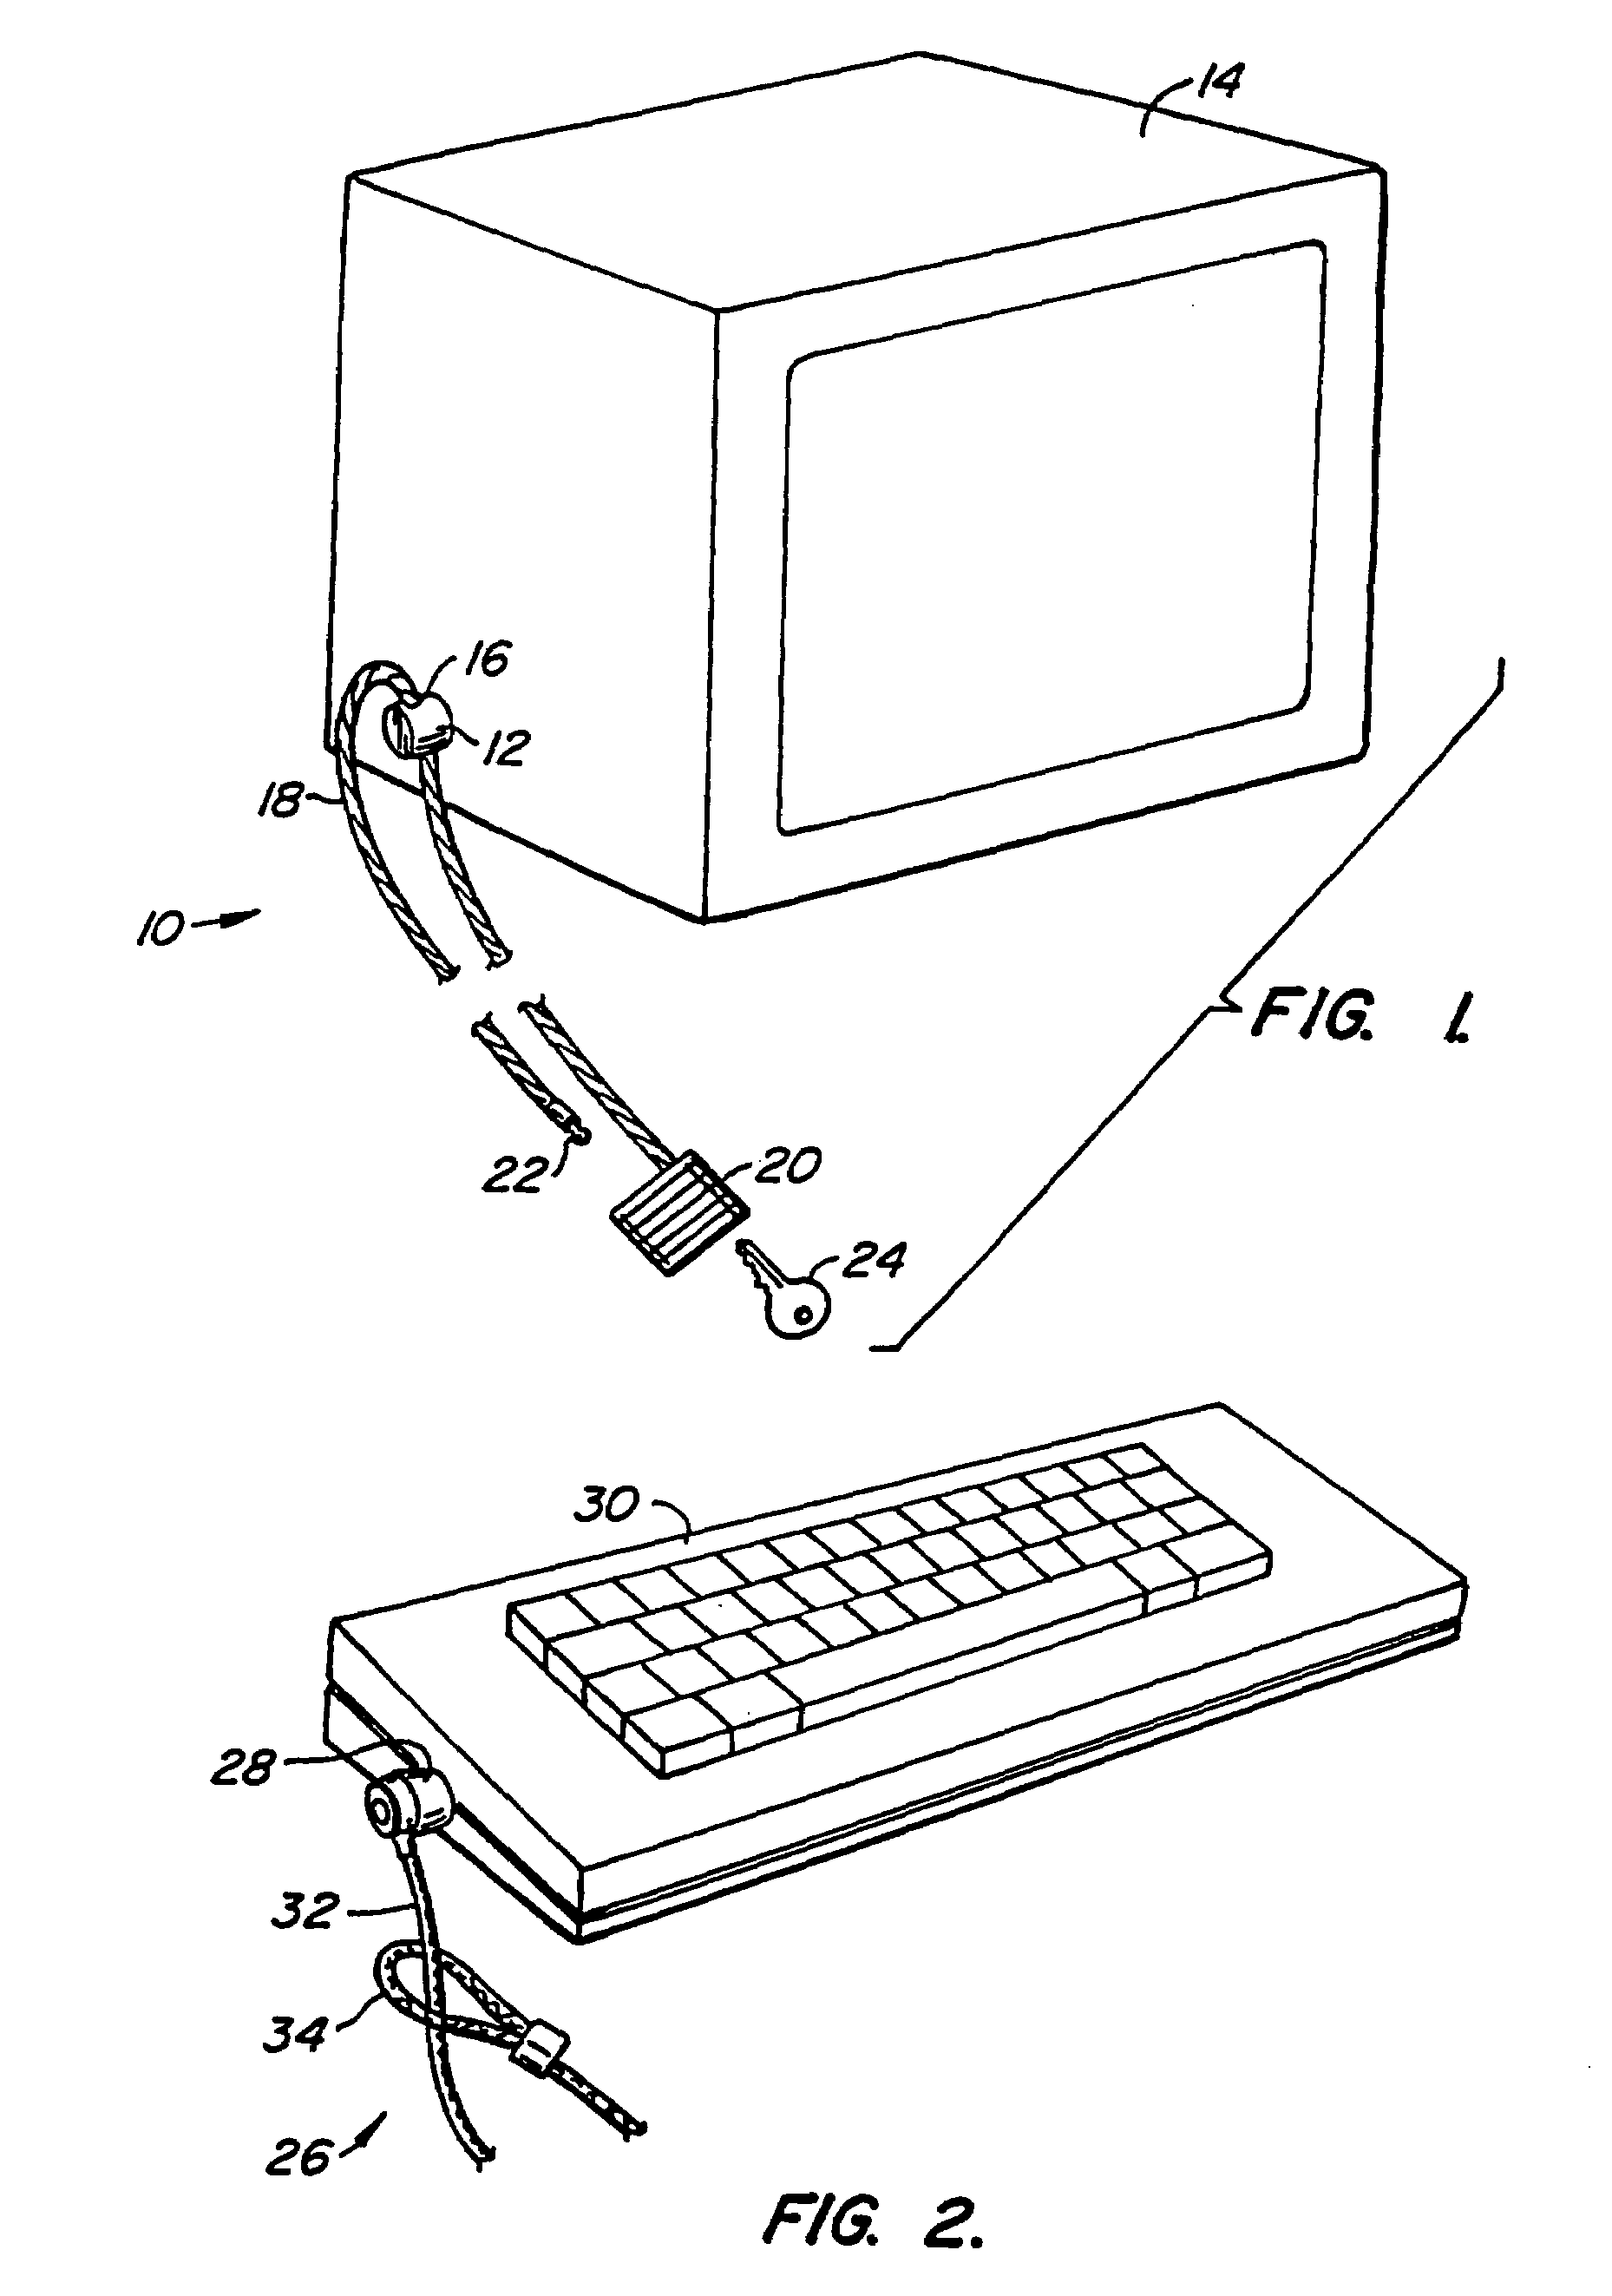 Computer physical security device